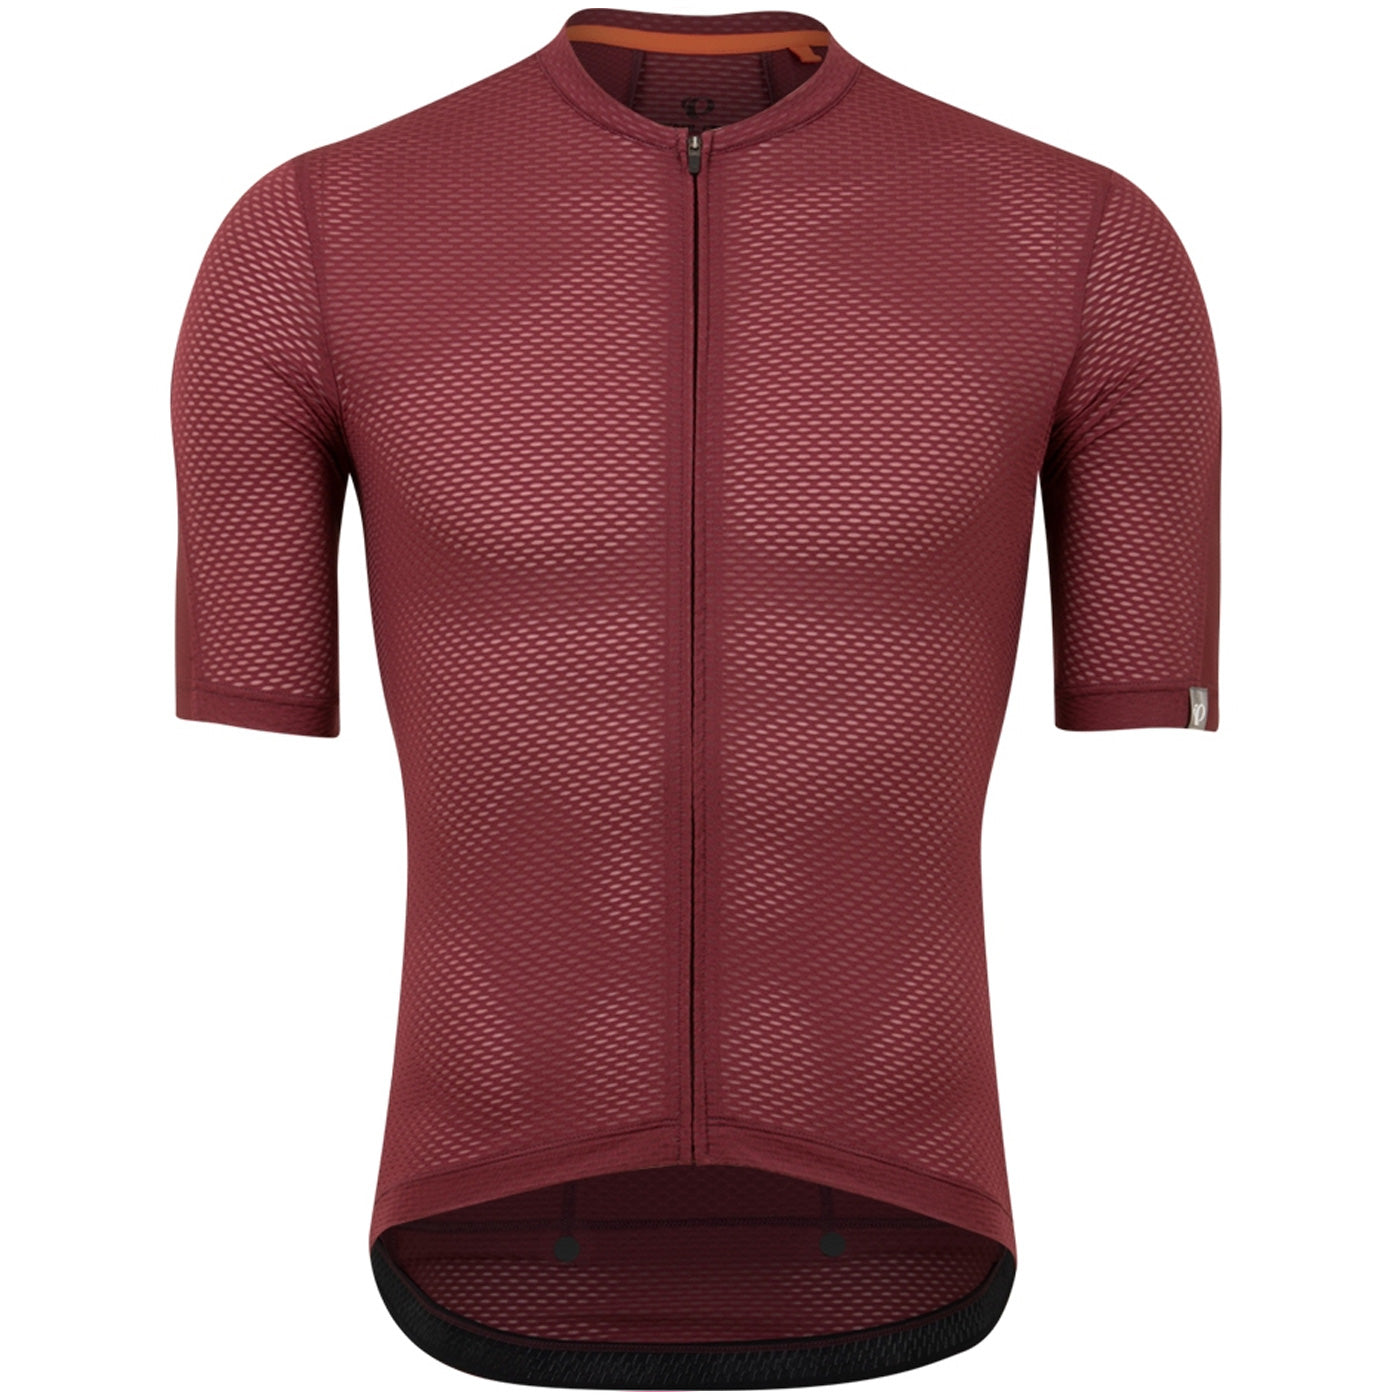 Pearl Izumi: cycling clothing and bike accessories